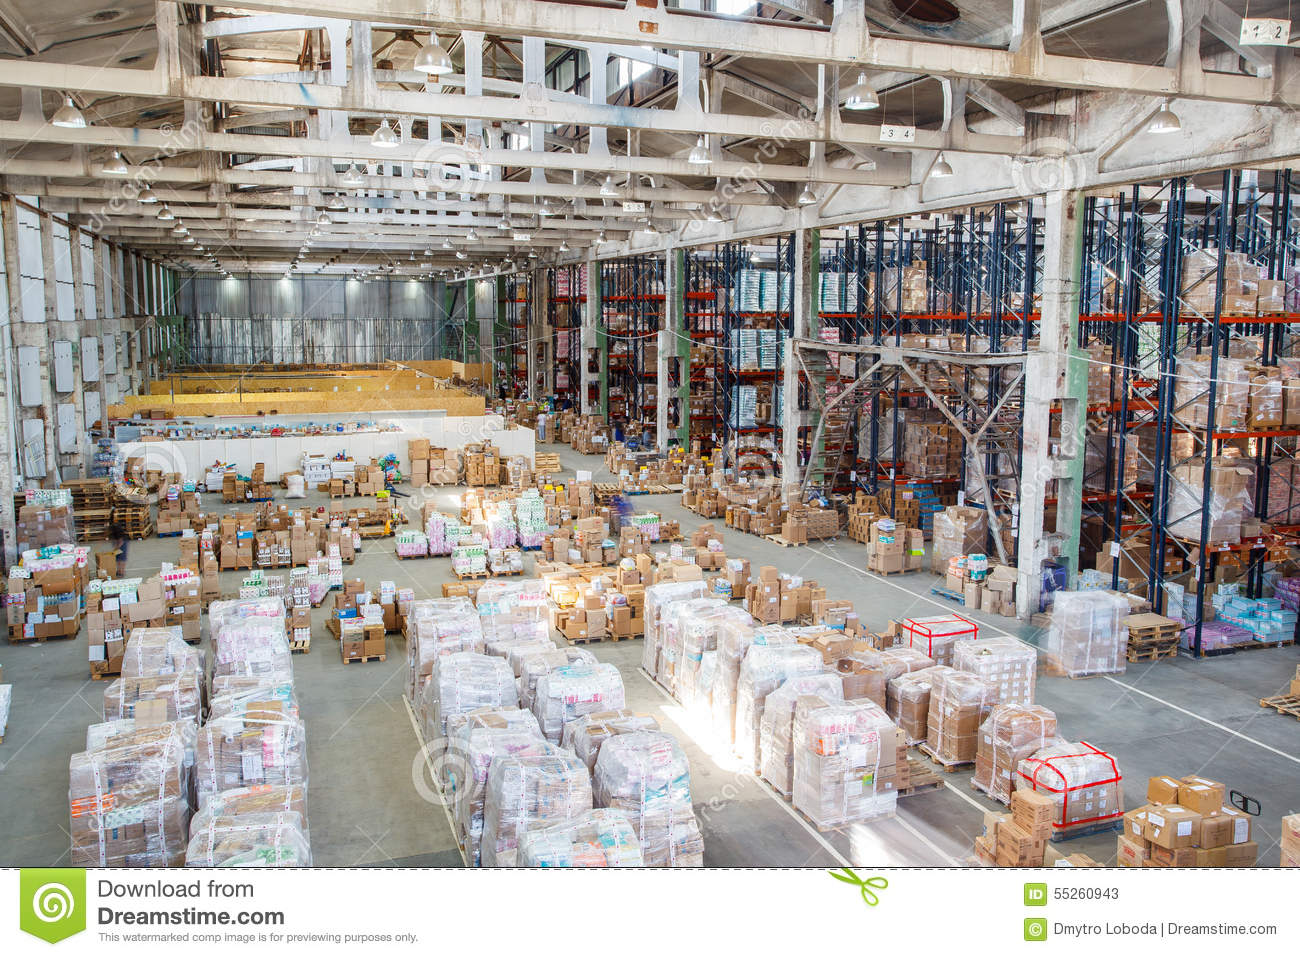 The Warehouse Complex For The Storage Of Consumer Goods